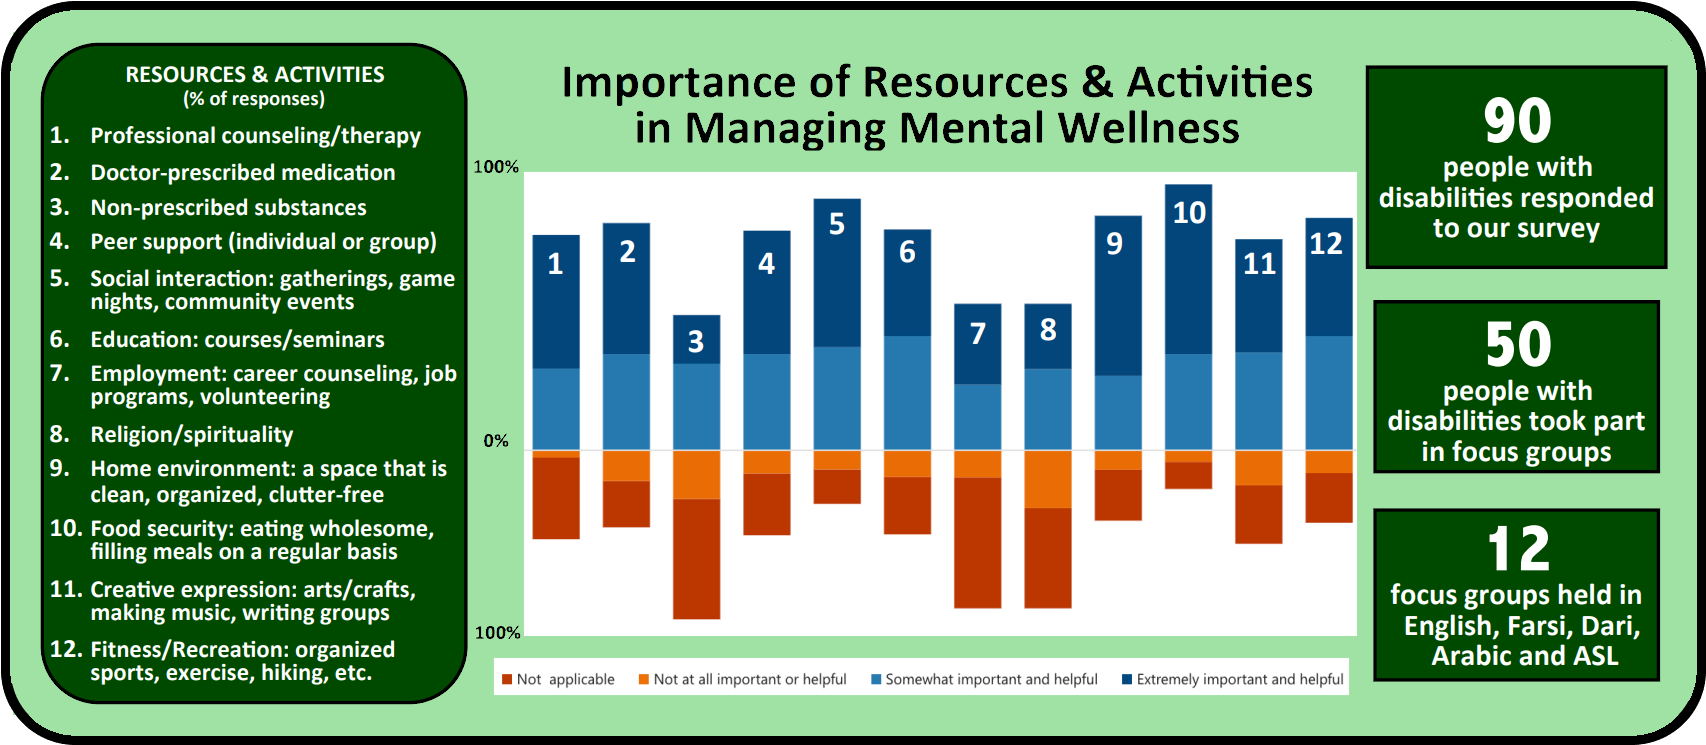 A graph showing the importance of resources and activities in managing mental wellness.